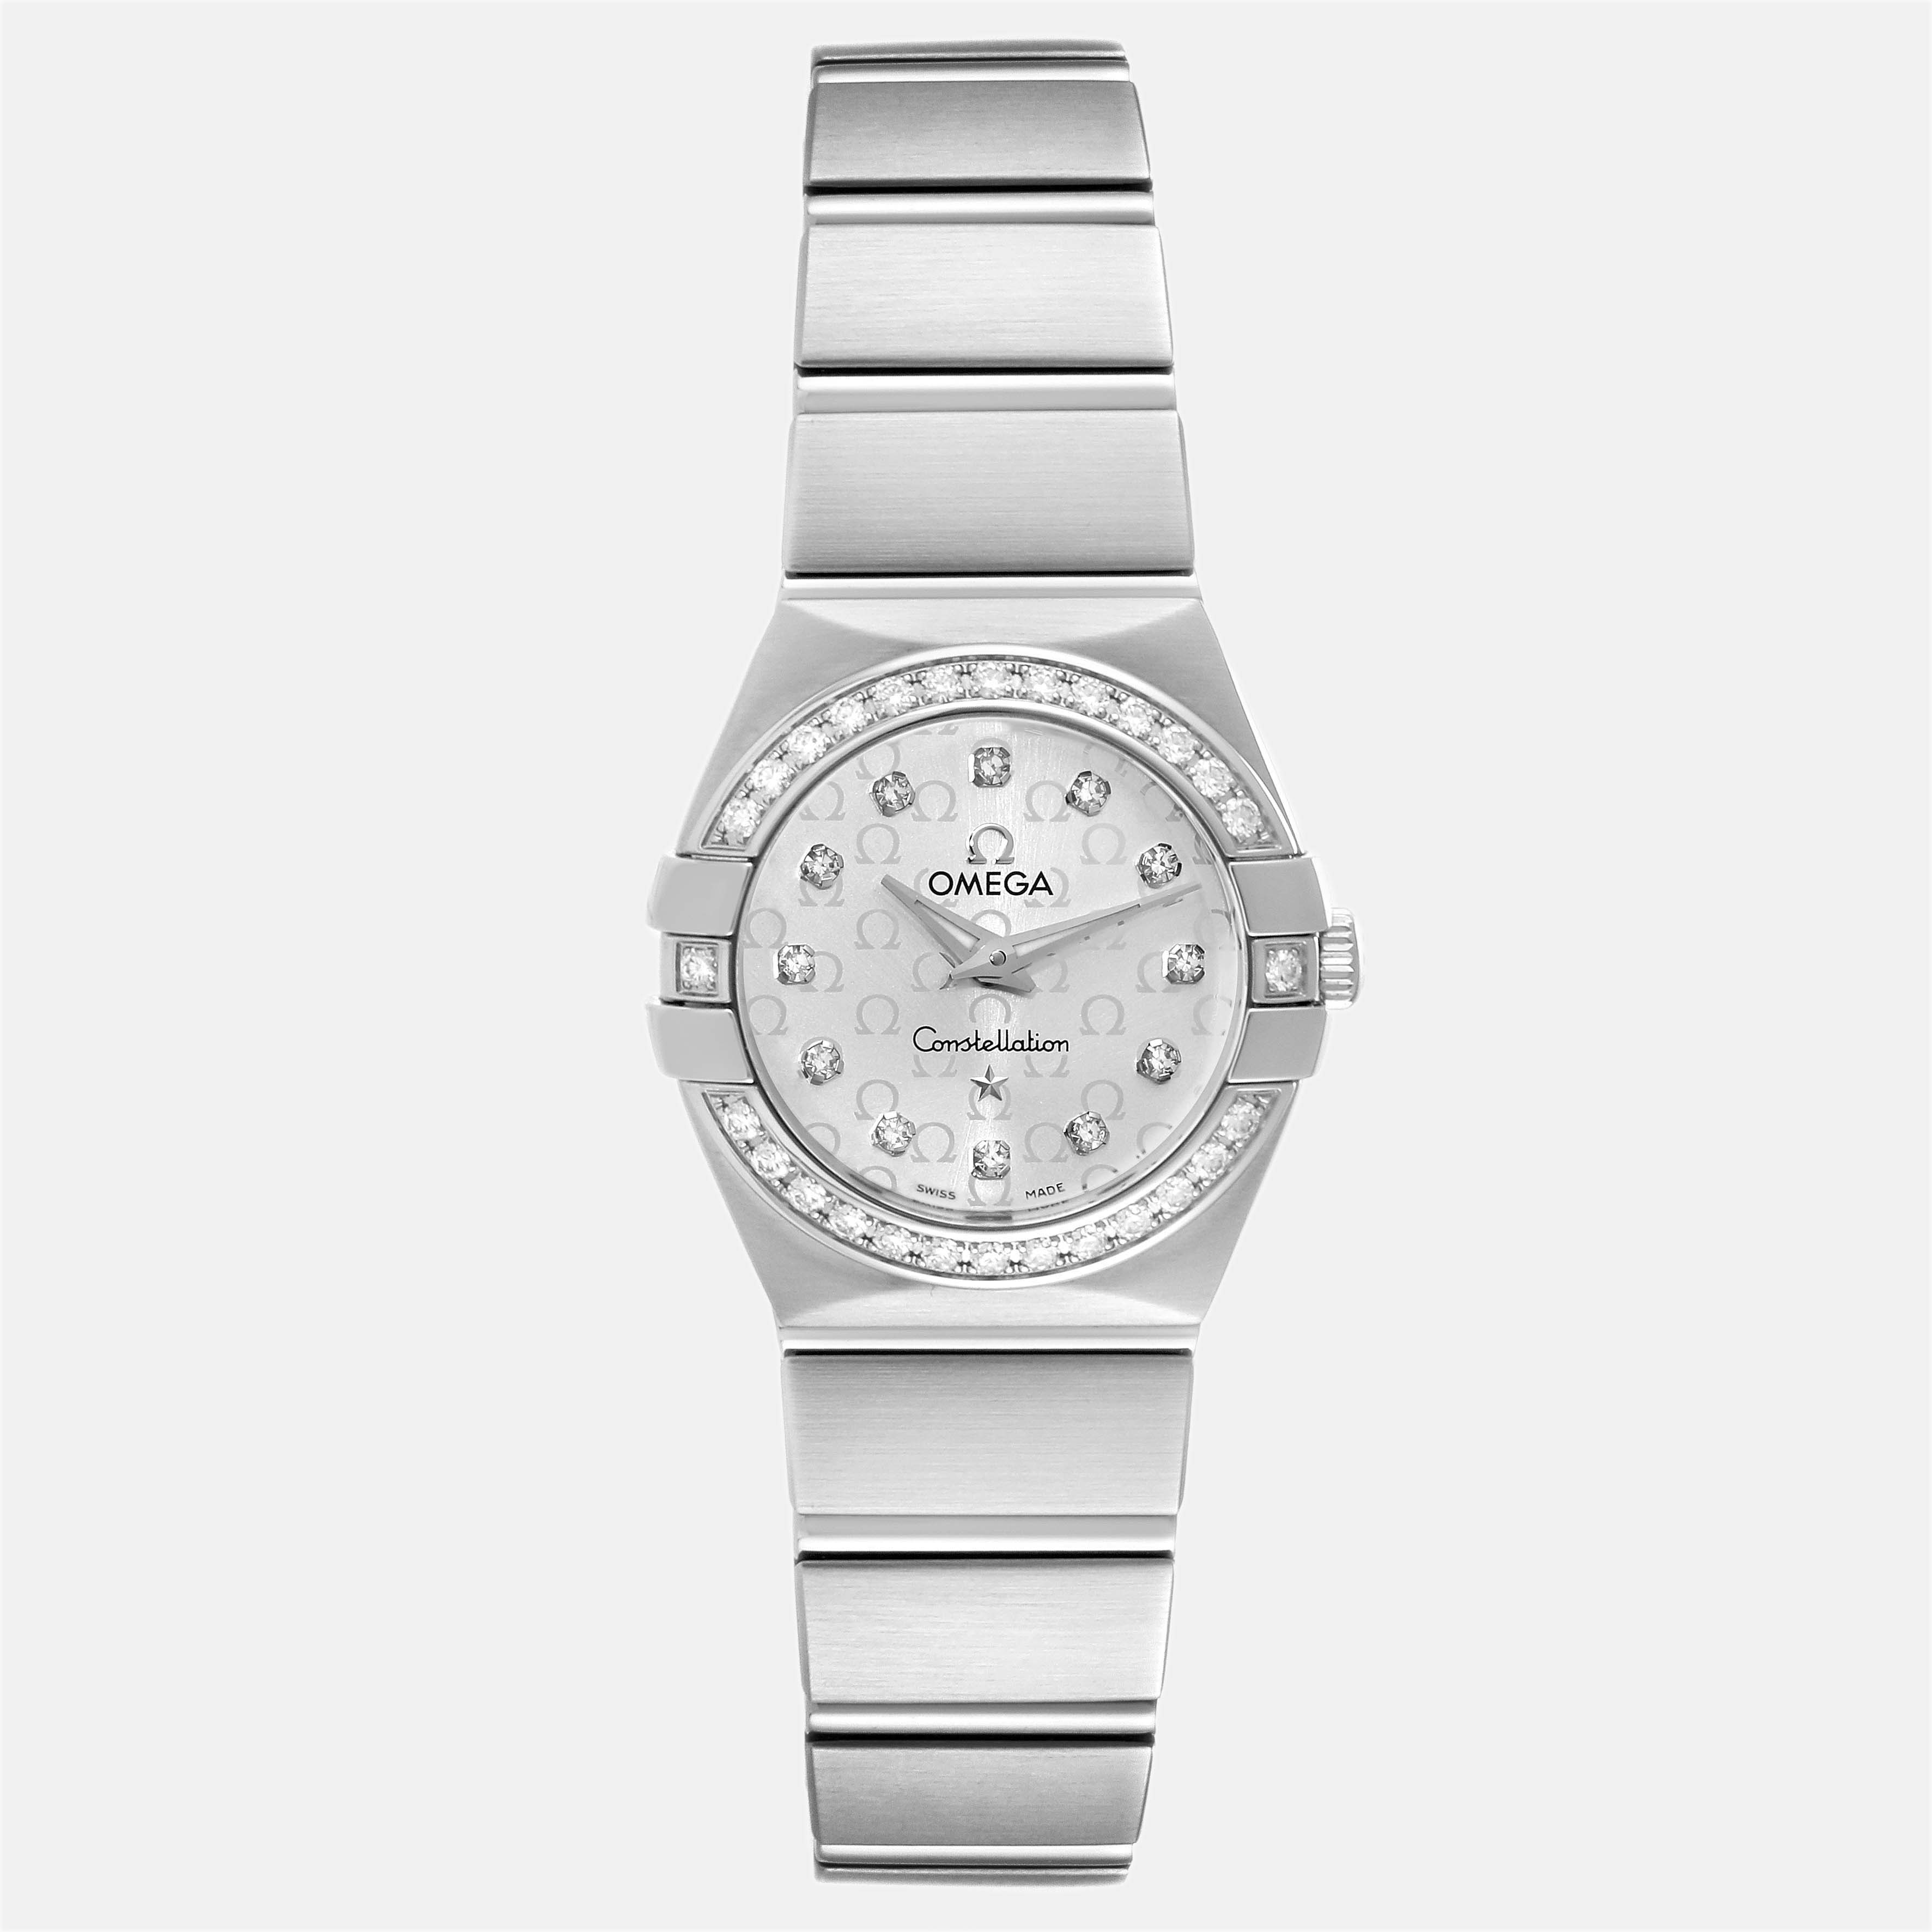 Pre-owned Omega Silver Diamond Stainless Steel Constellation 123.15.24.60.52.001 Quartz Women's Wristwatch 24 Mm